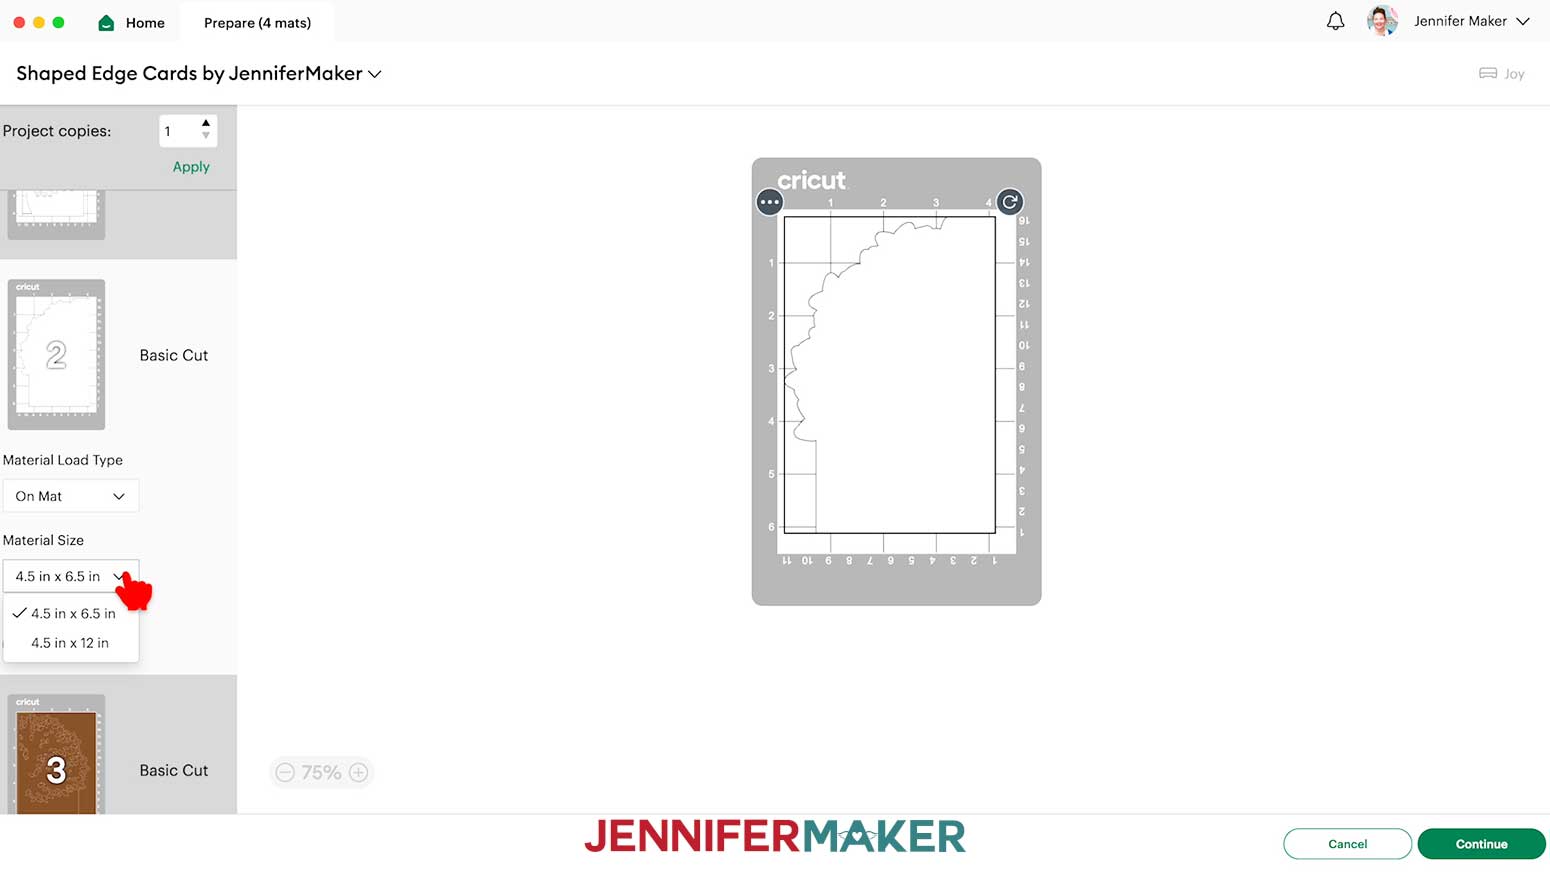 On the Cricut Design Space Prepare screen, make sure your Material Size matches your Joy-size material